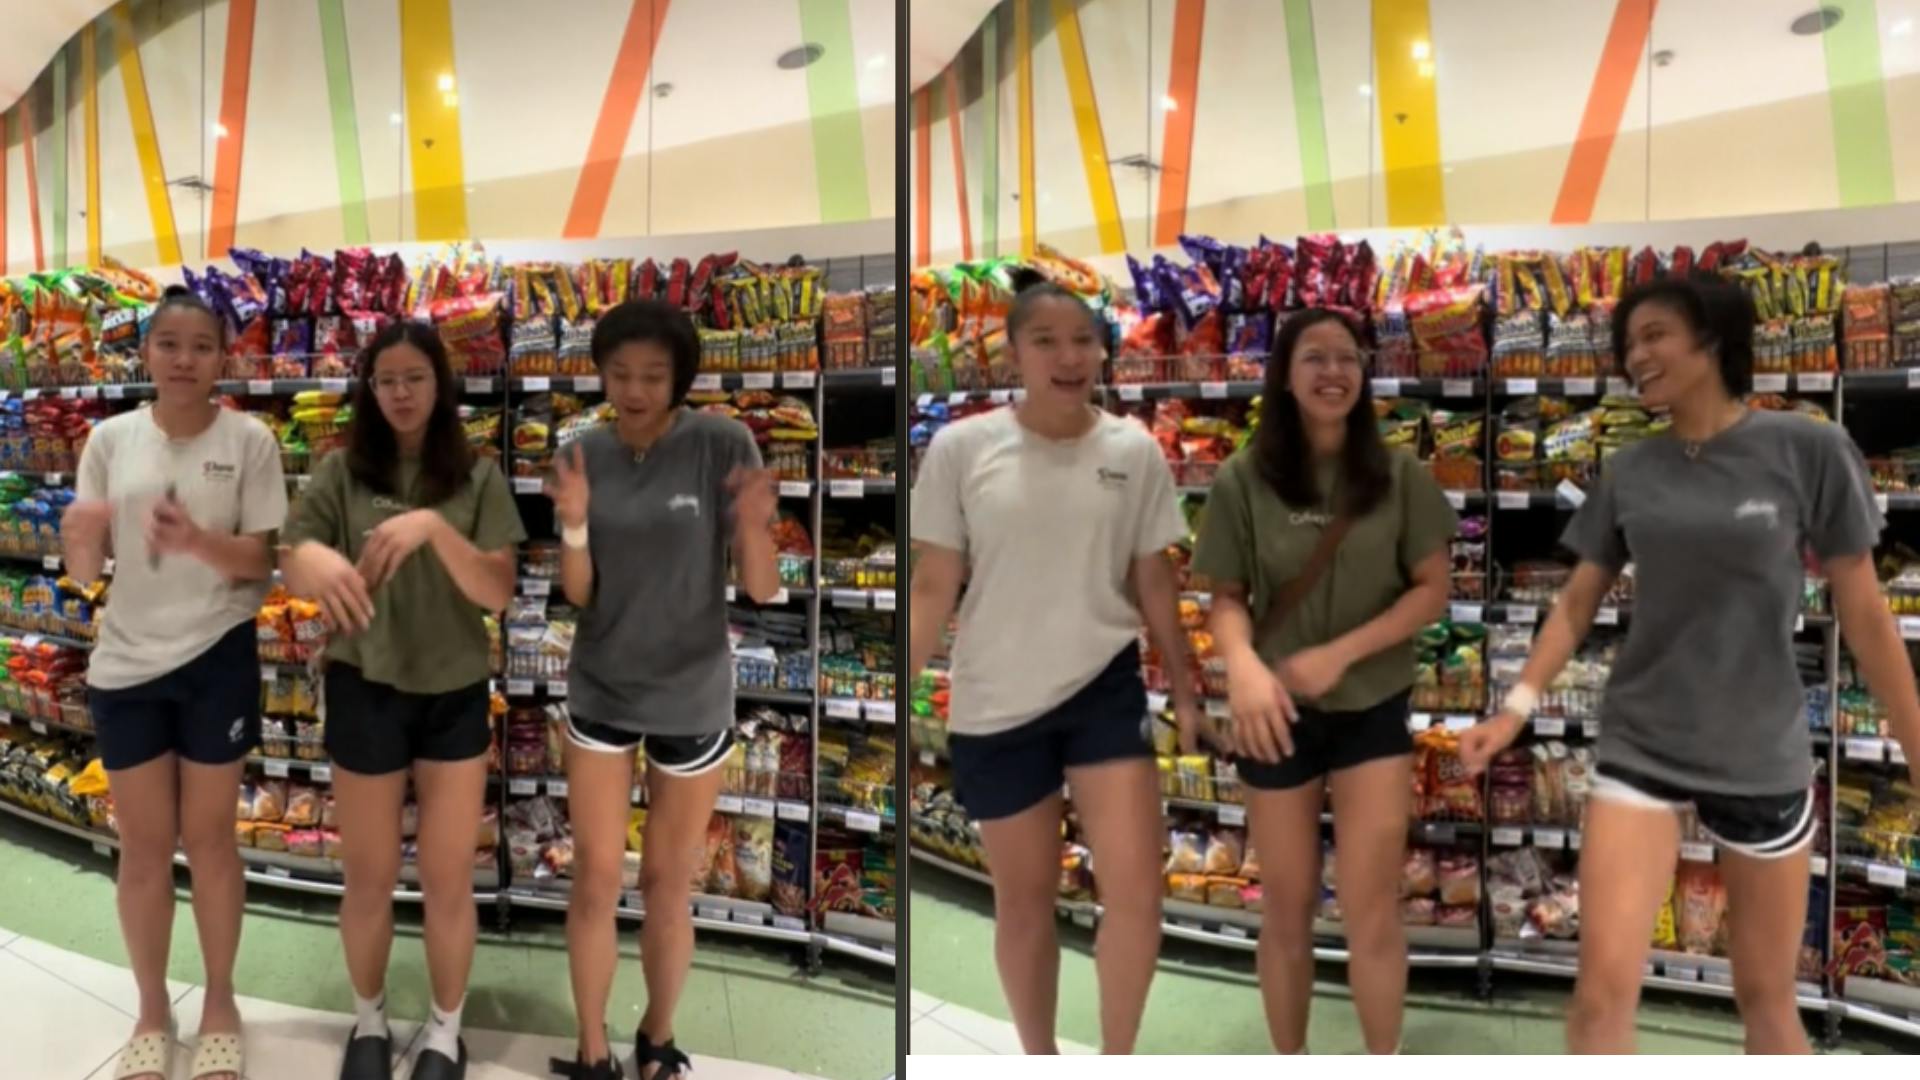 BINIverse everywhere: Alas Pilipinas’ Eya Laure, Angel Canino, and Arah Panique spice up the grocery aisle with BINI moves